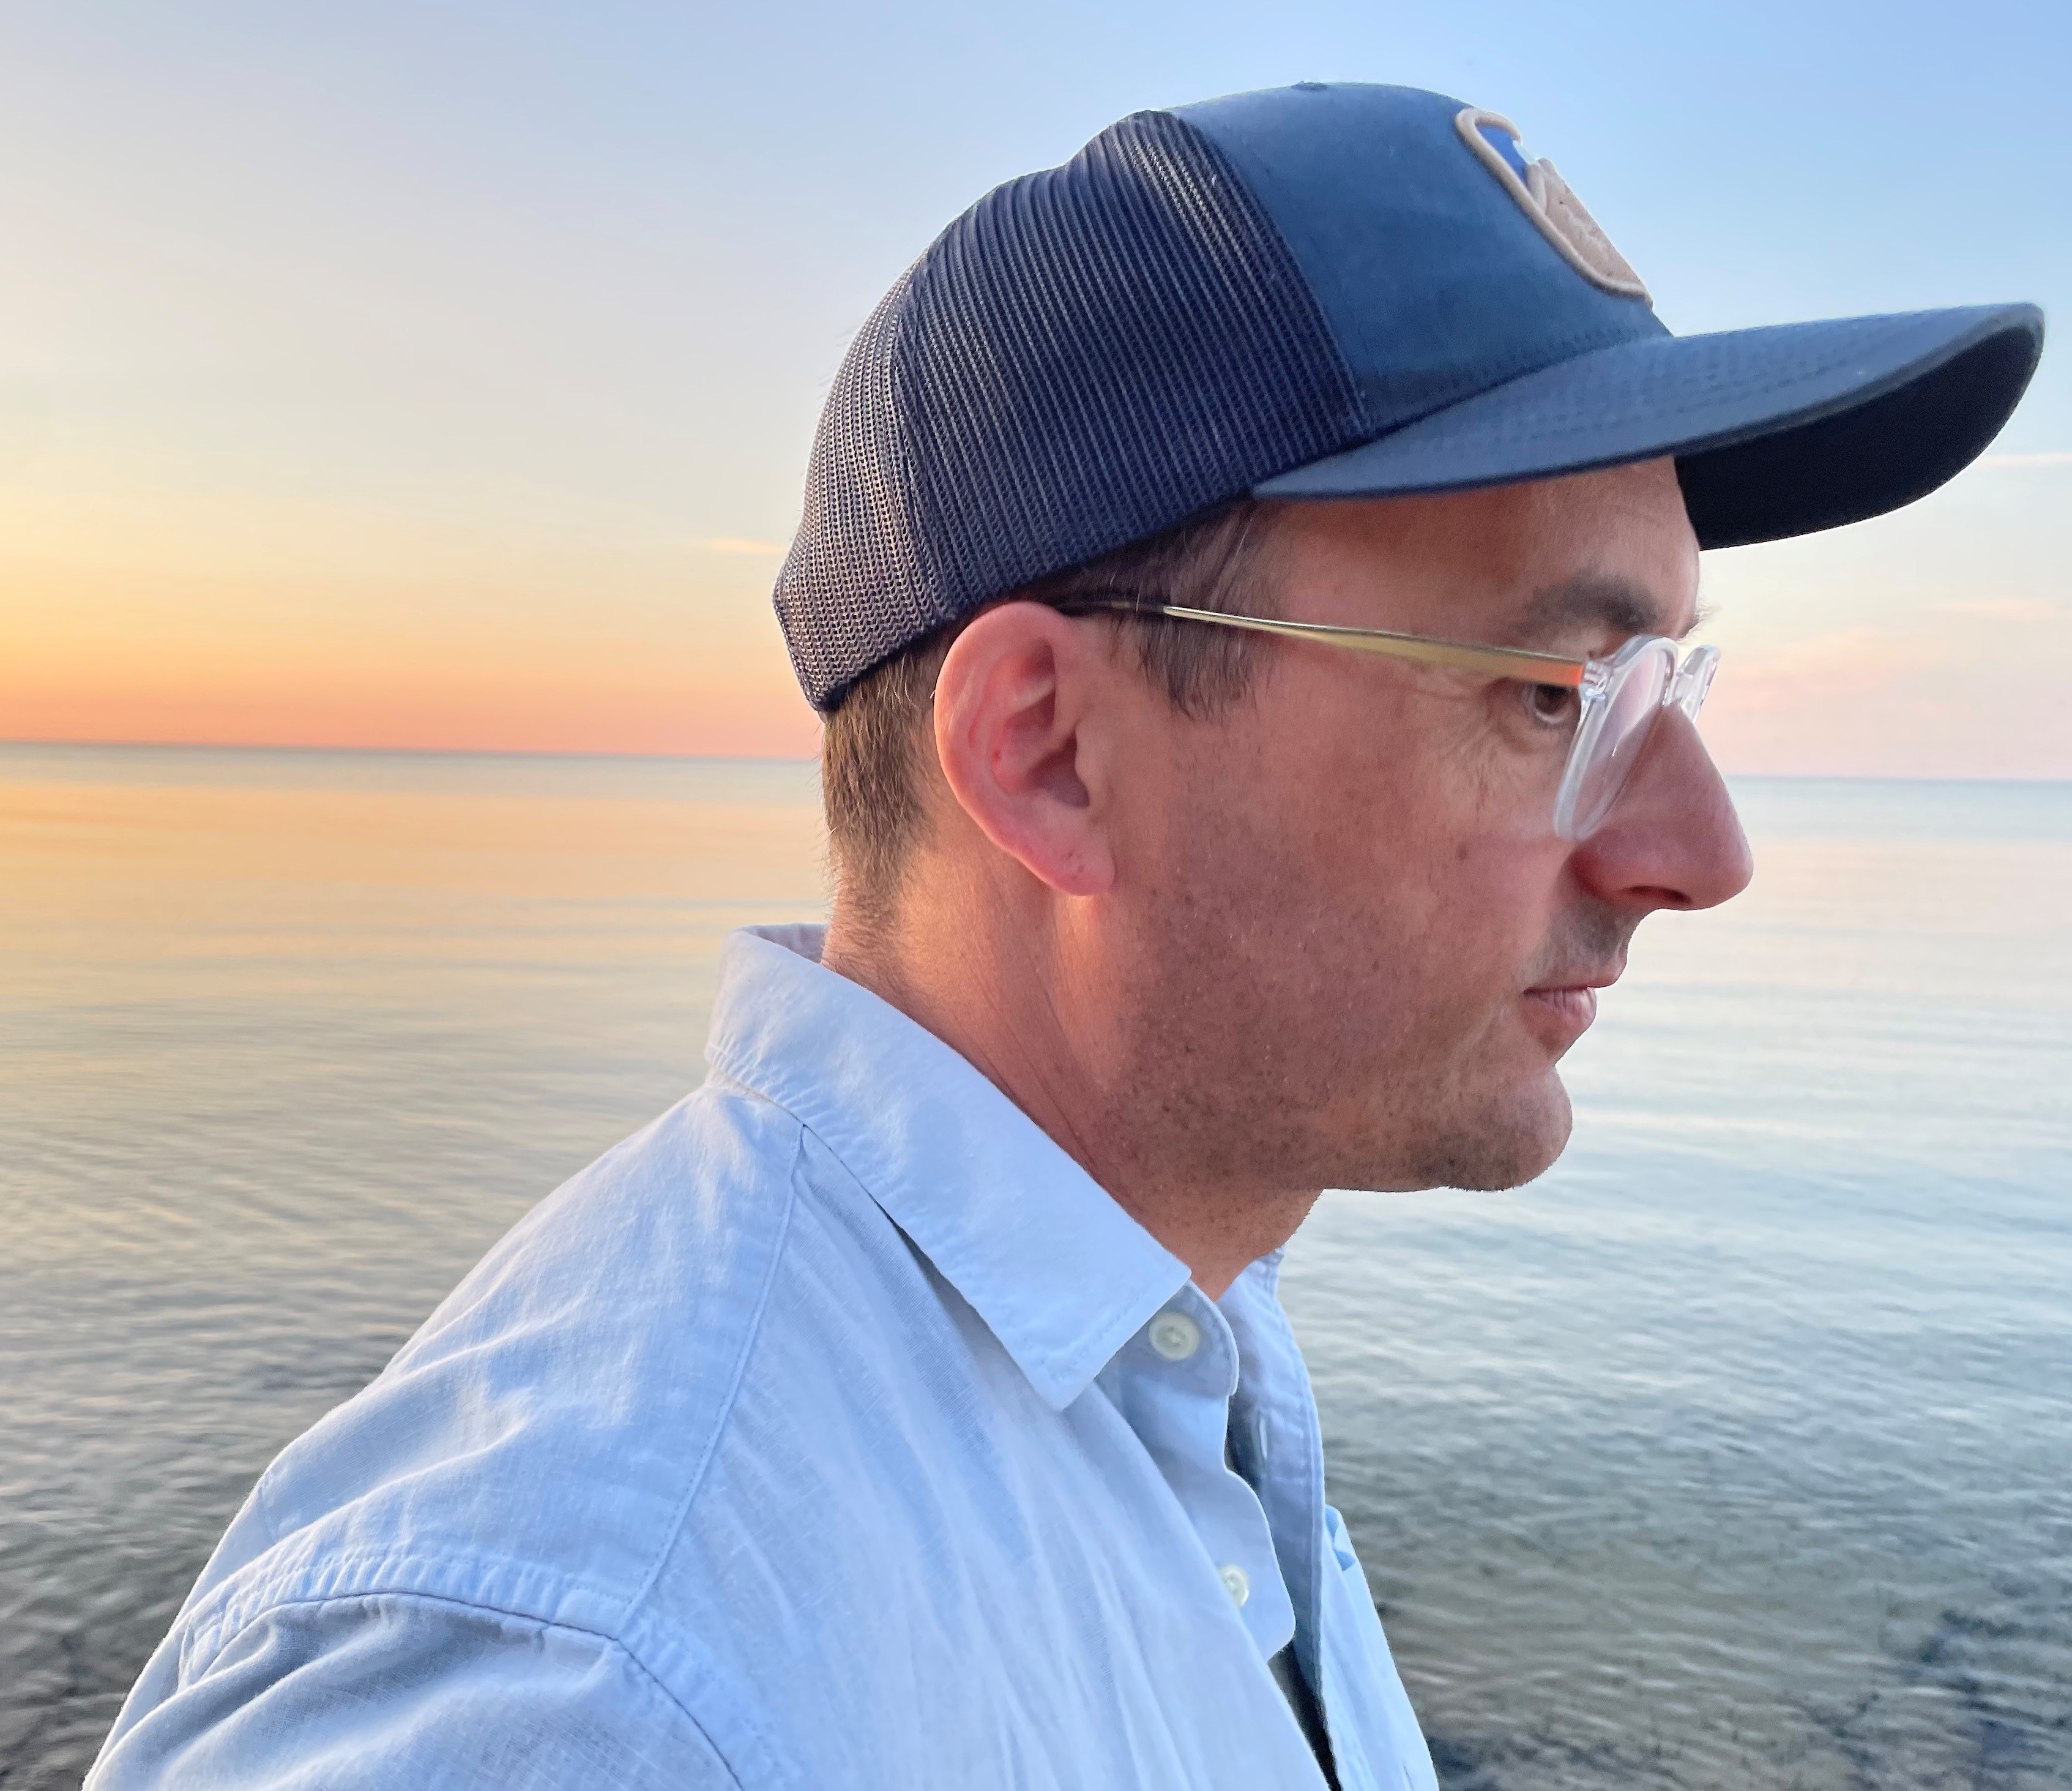 A man wearing a light blue shirt, navy blue ball cap, and glasses is seen in profile. He stands in front of a body of water at sunset.